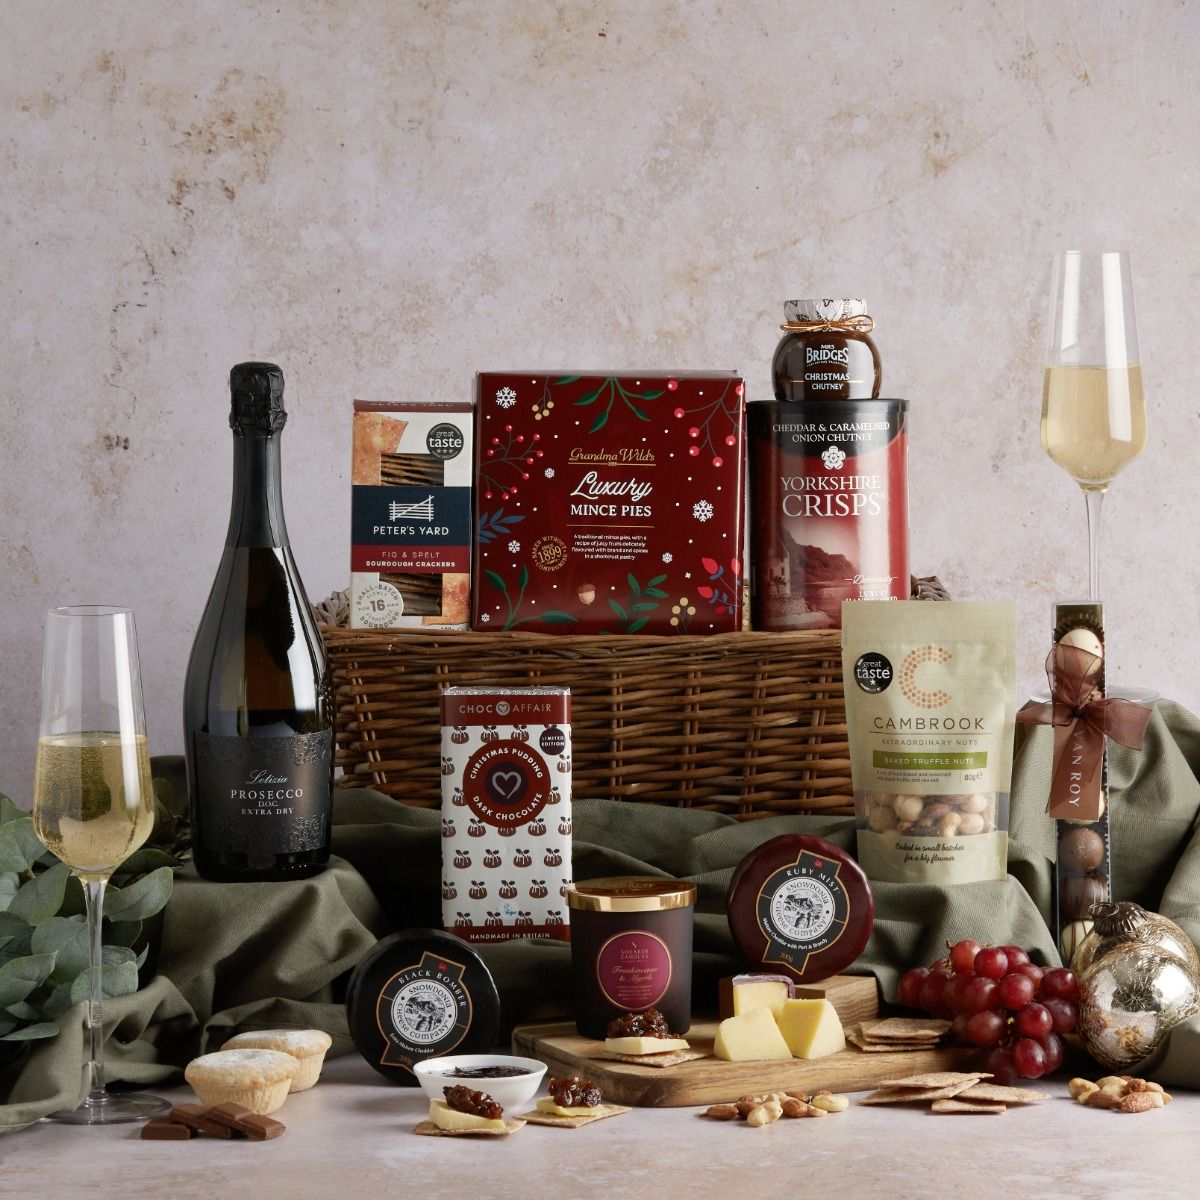 Couples Christmas Sharing Hamper with all of its contents on display, including a open wicker basket